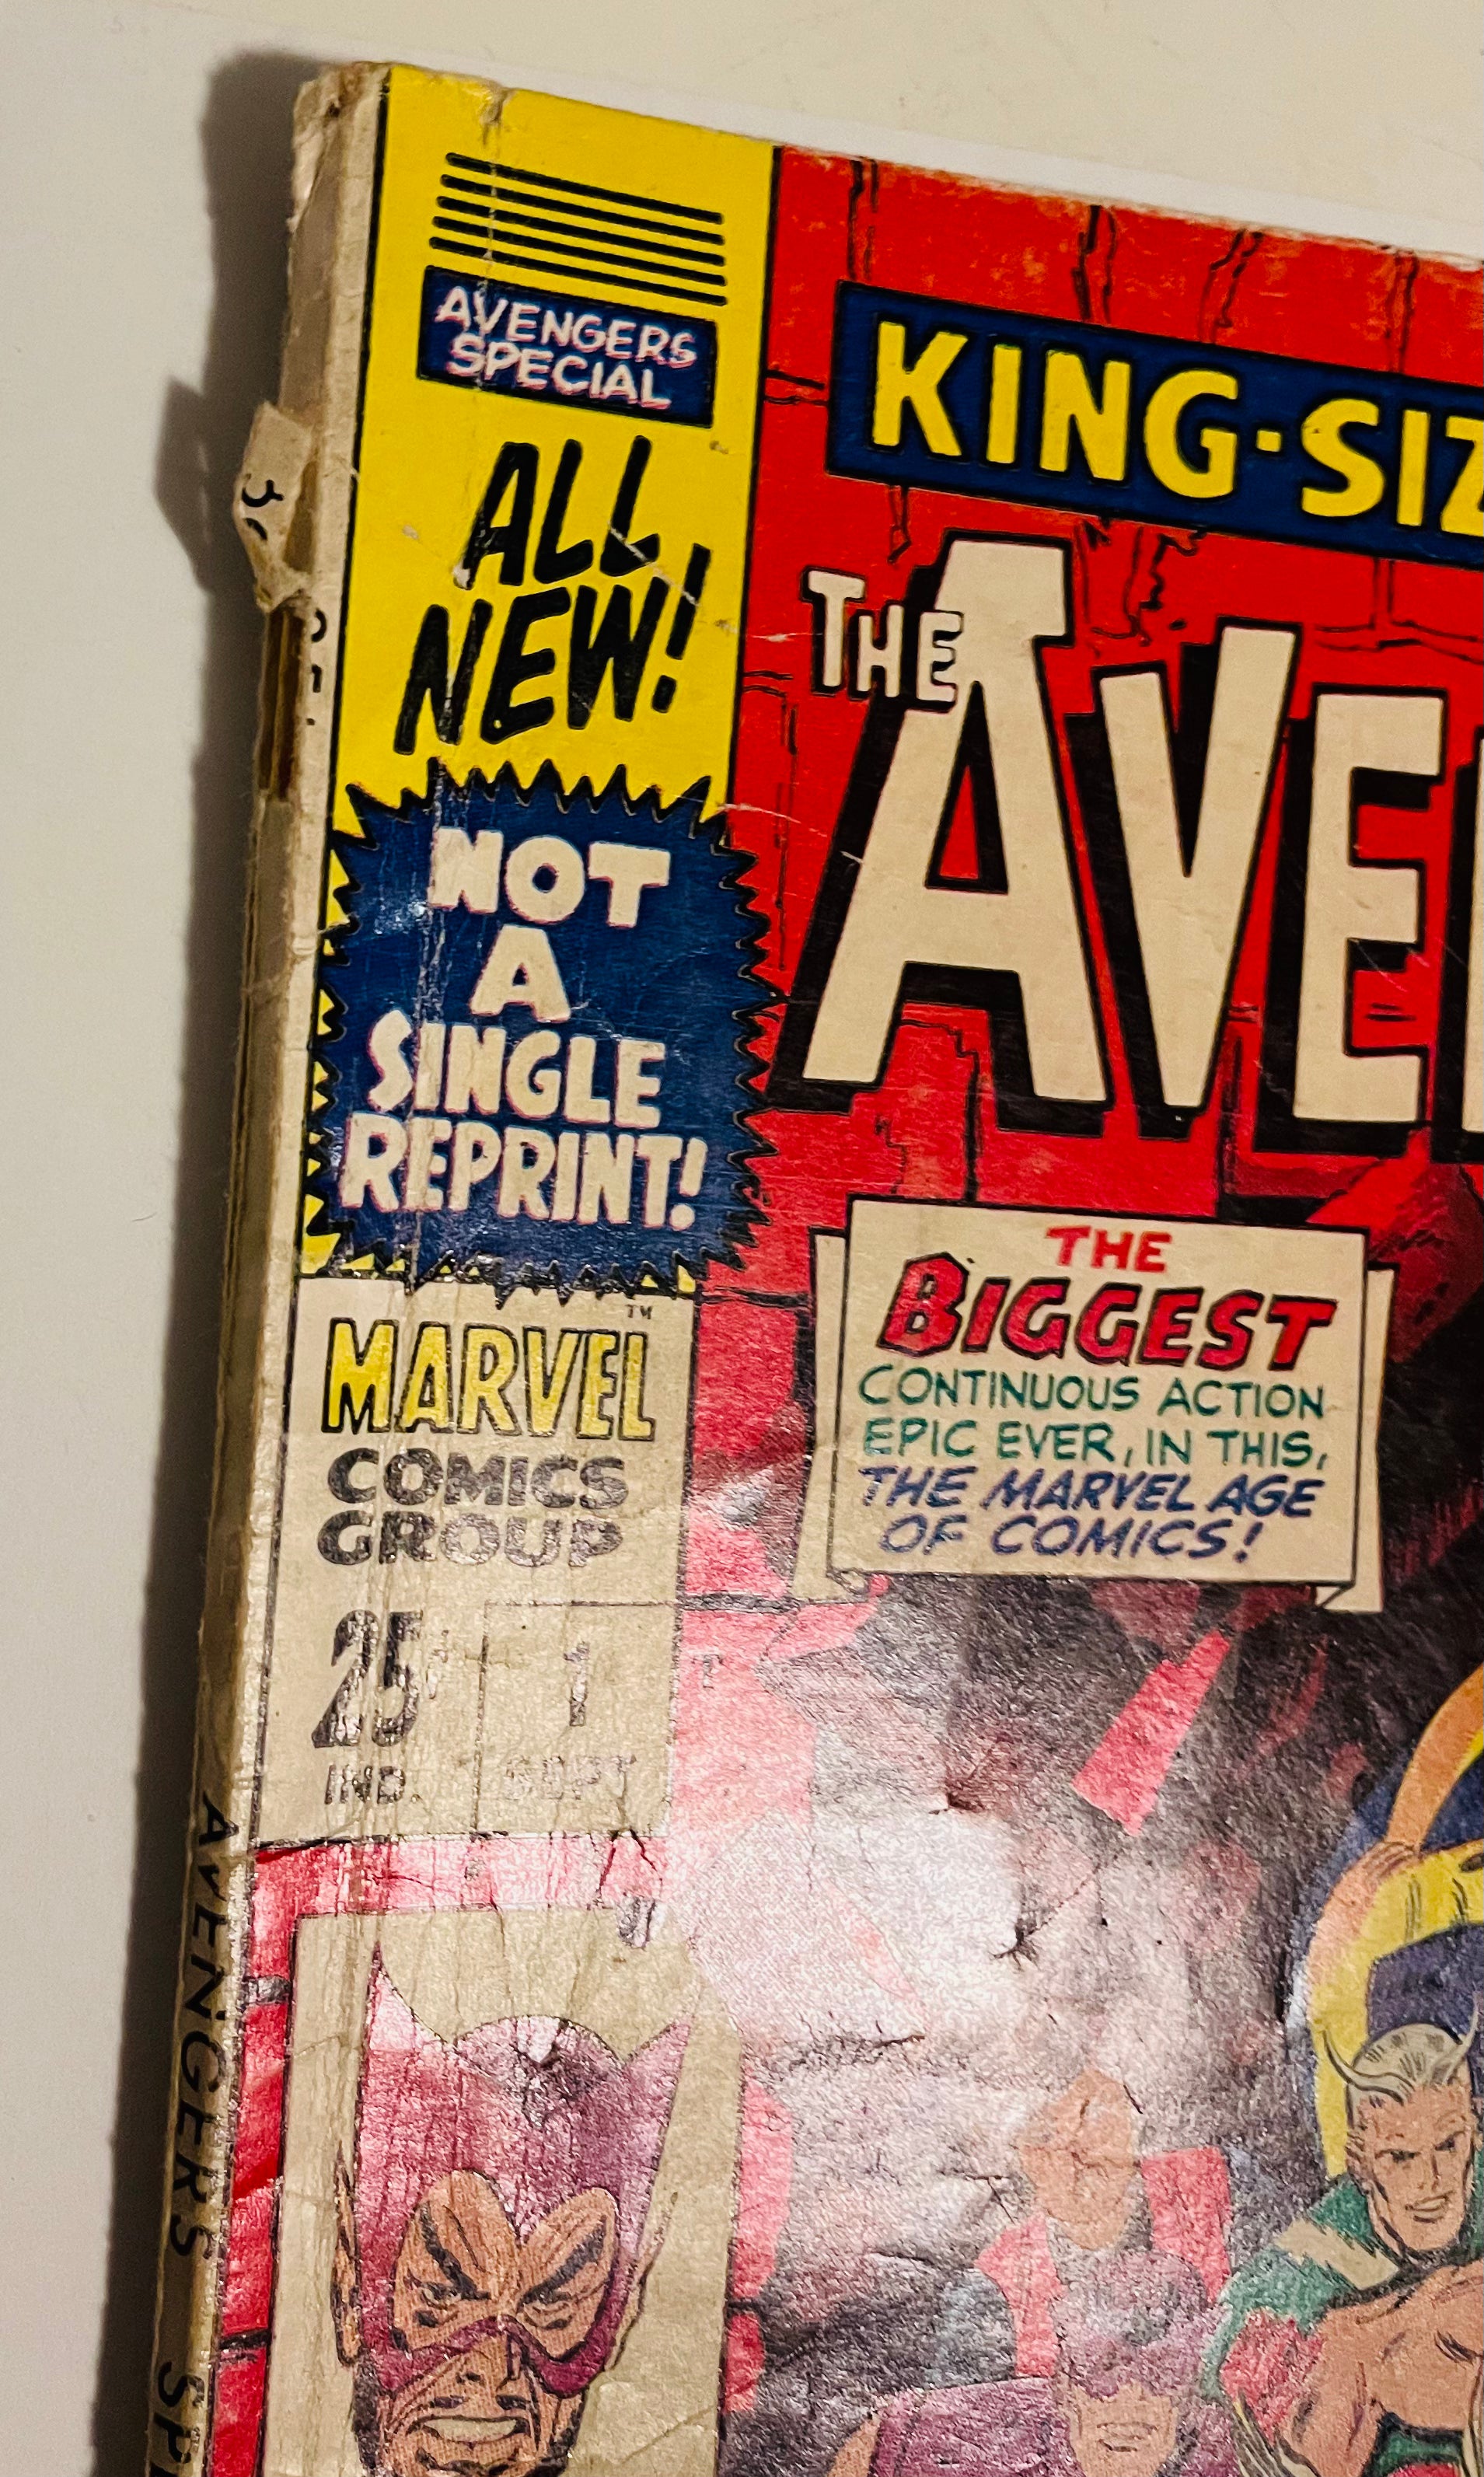 Avengers King size special comic #1 from 1967